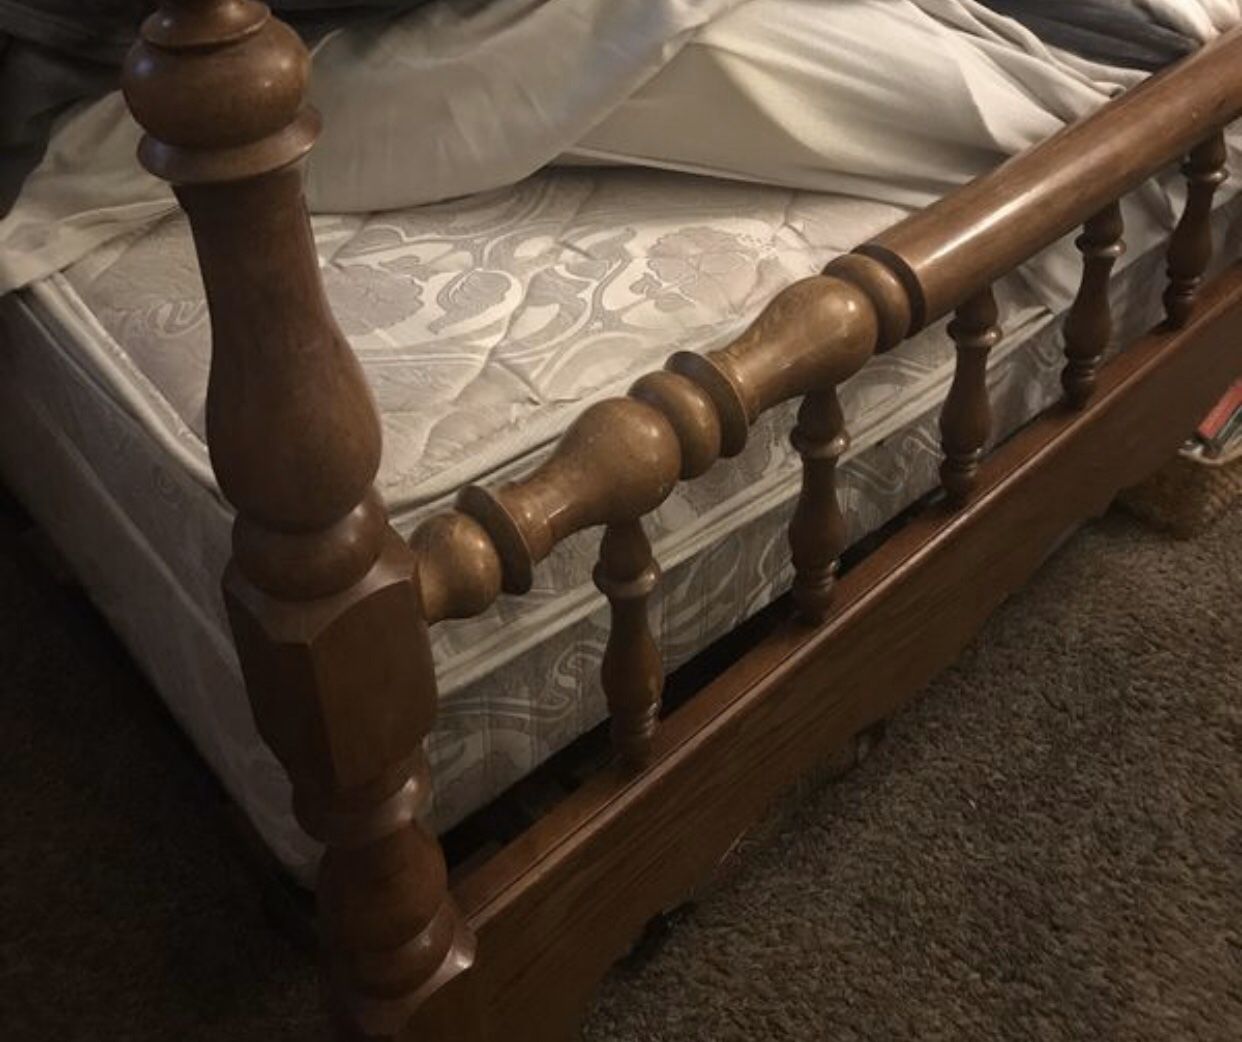 Queen bed for sale without the frame